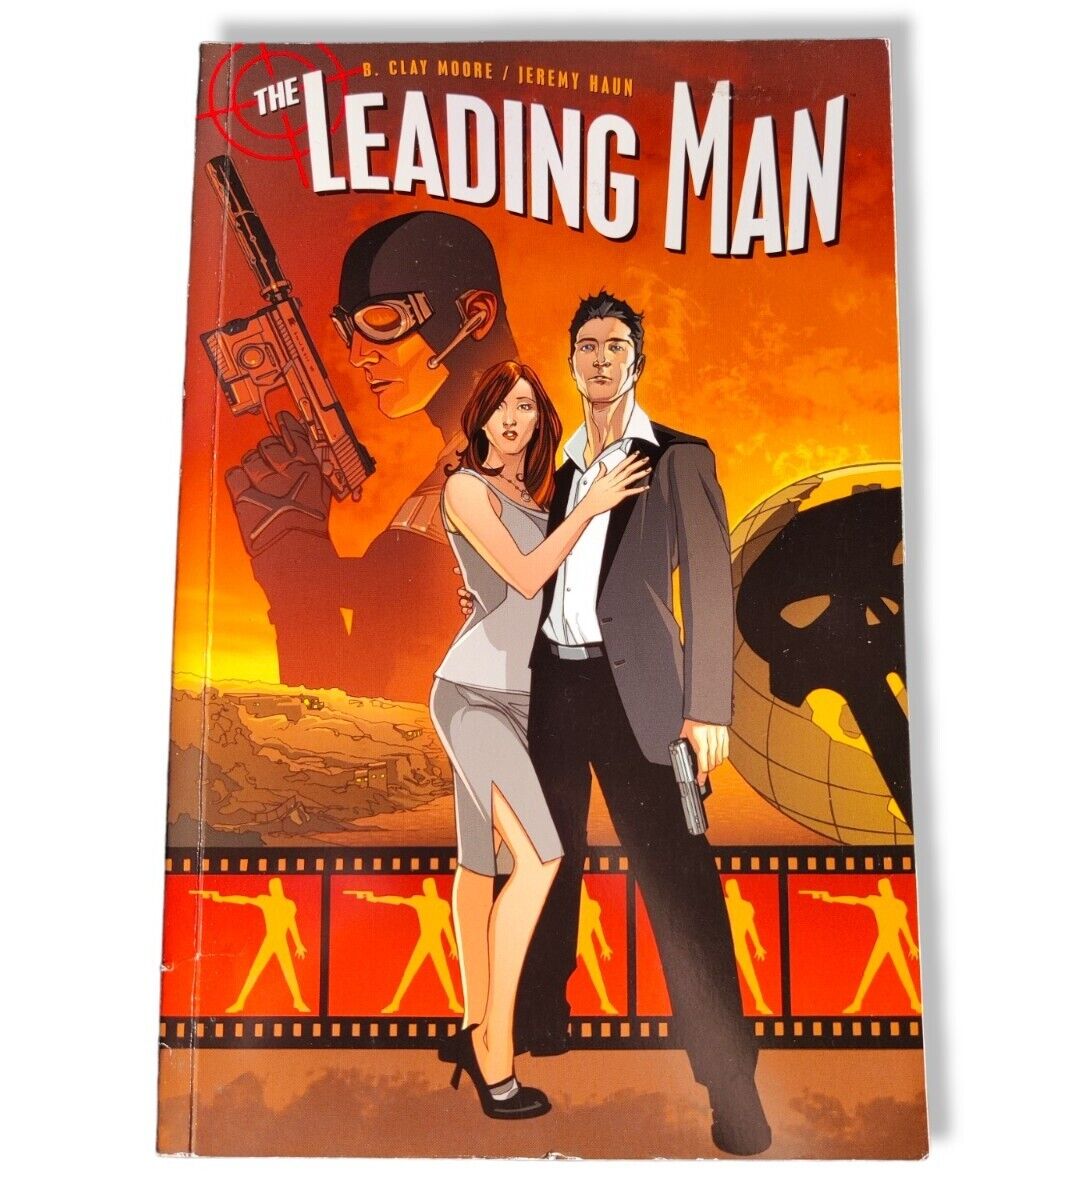 The Leading Man Volume 1 James B. Clay Moore Jeremy Haun First Edition 2007 Oni